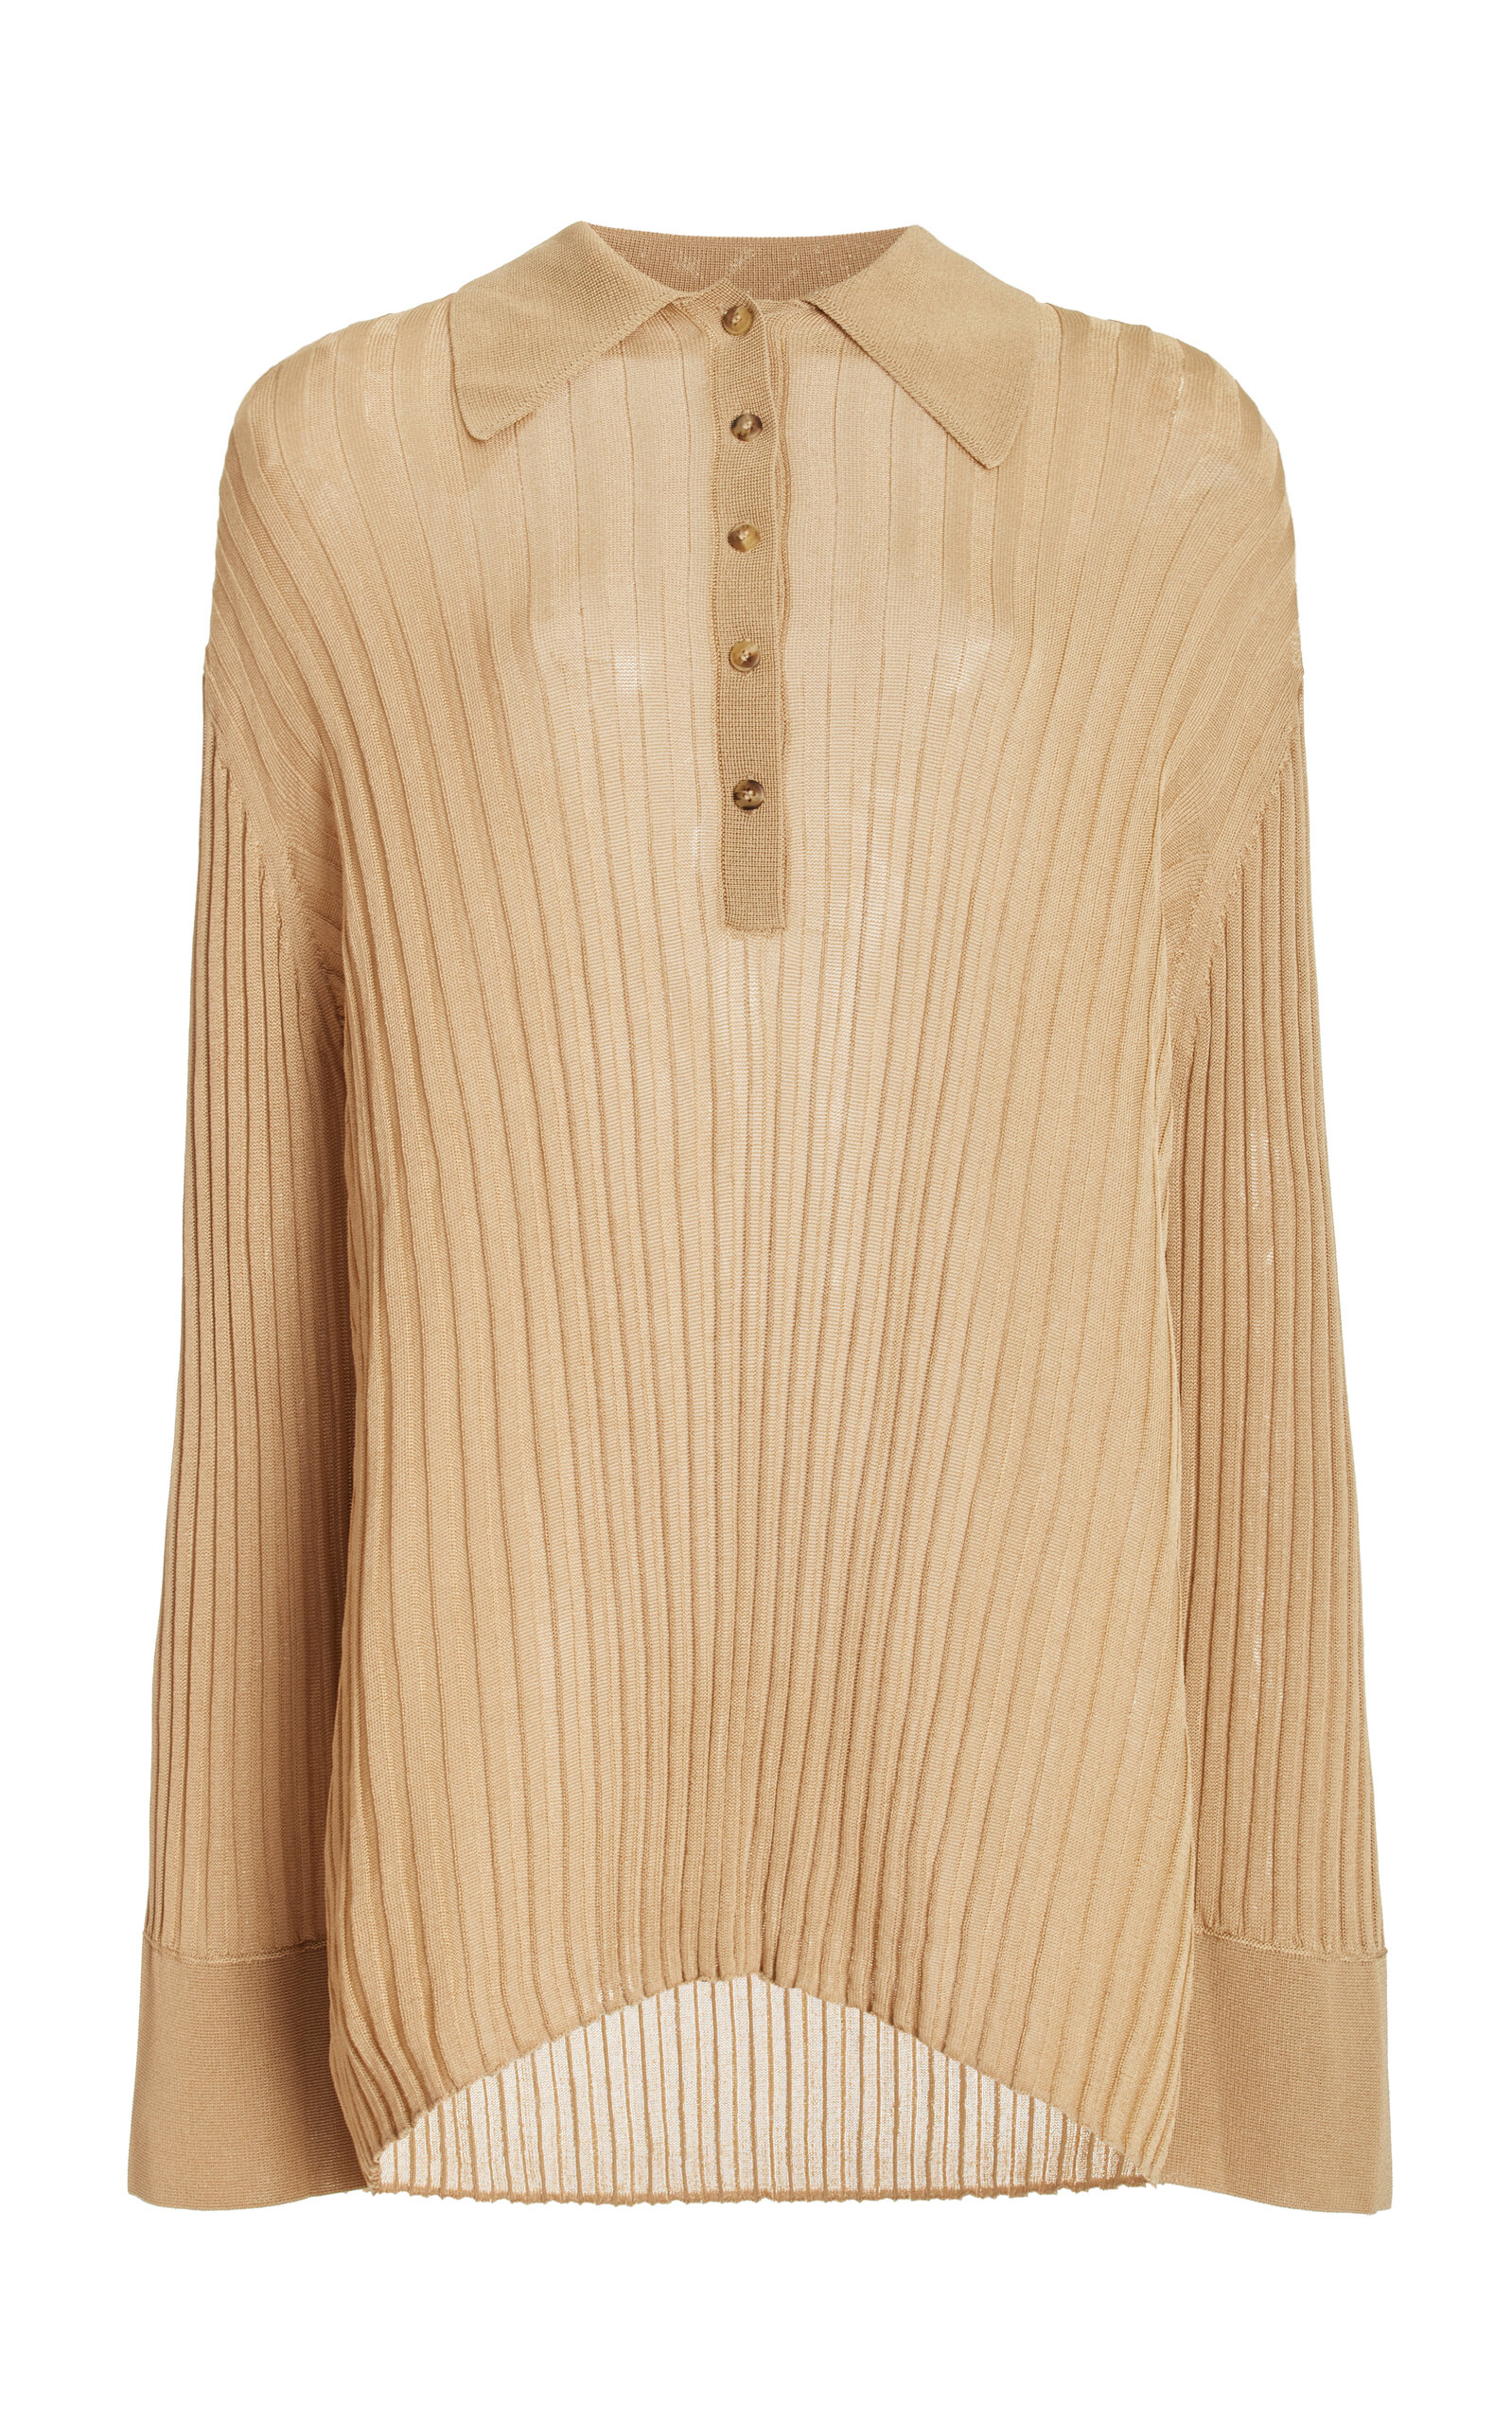 BY MALENE BIRGER DELPHINE RIBBED KNIT TOP